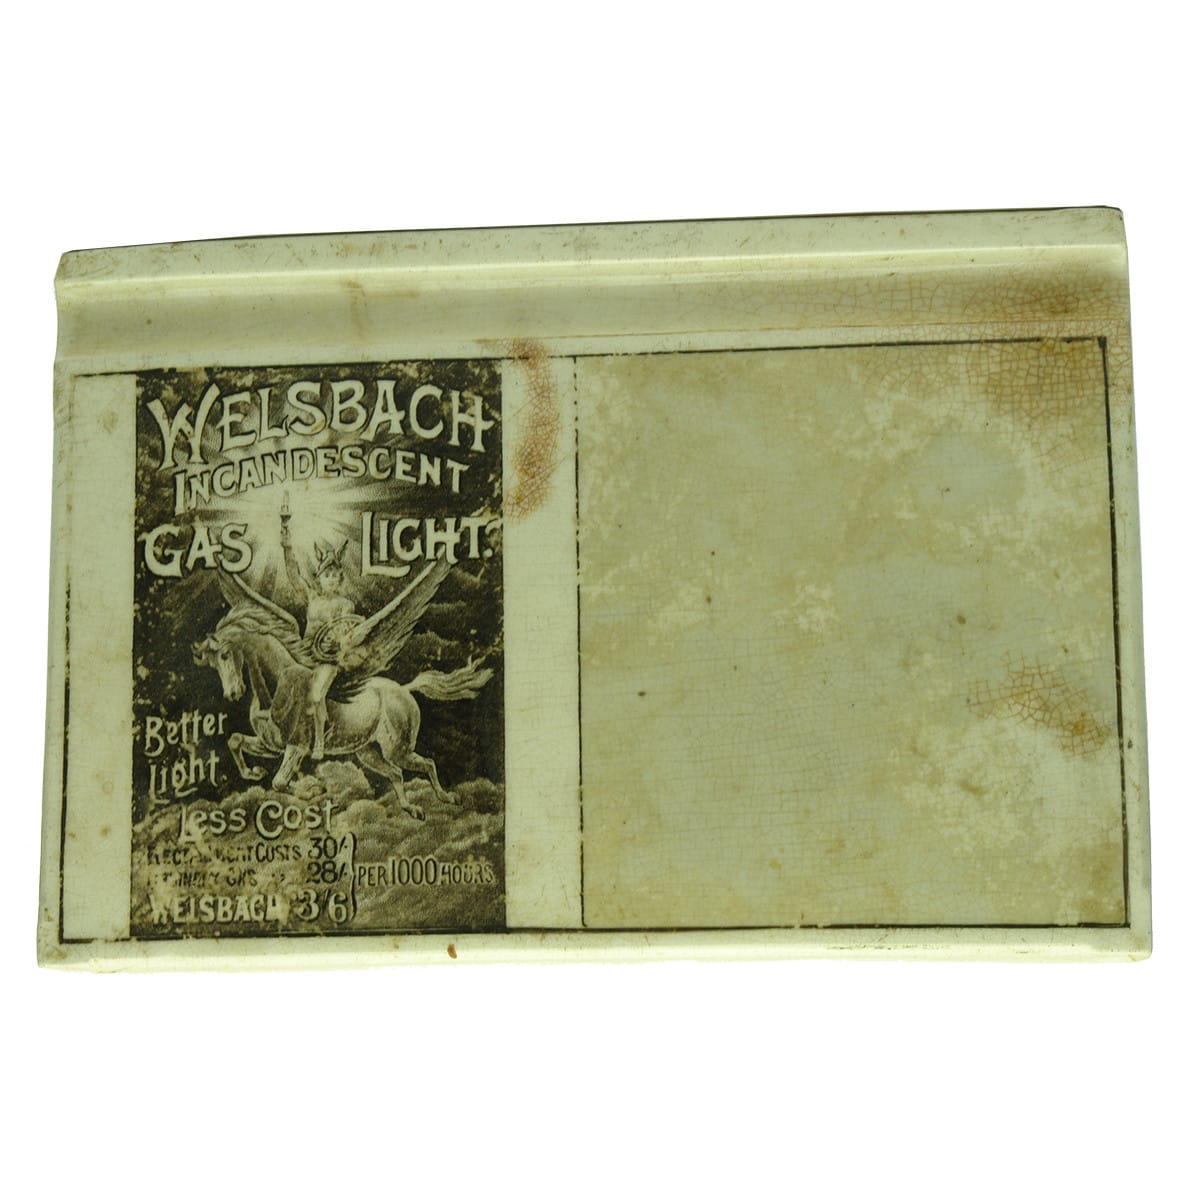 Miscellaneous. Advertising Pottery Writing Slope and Pencil Holder for Welsbach Incandescent Gas Light, Sydney. (New South Wales)